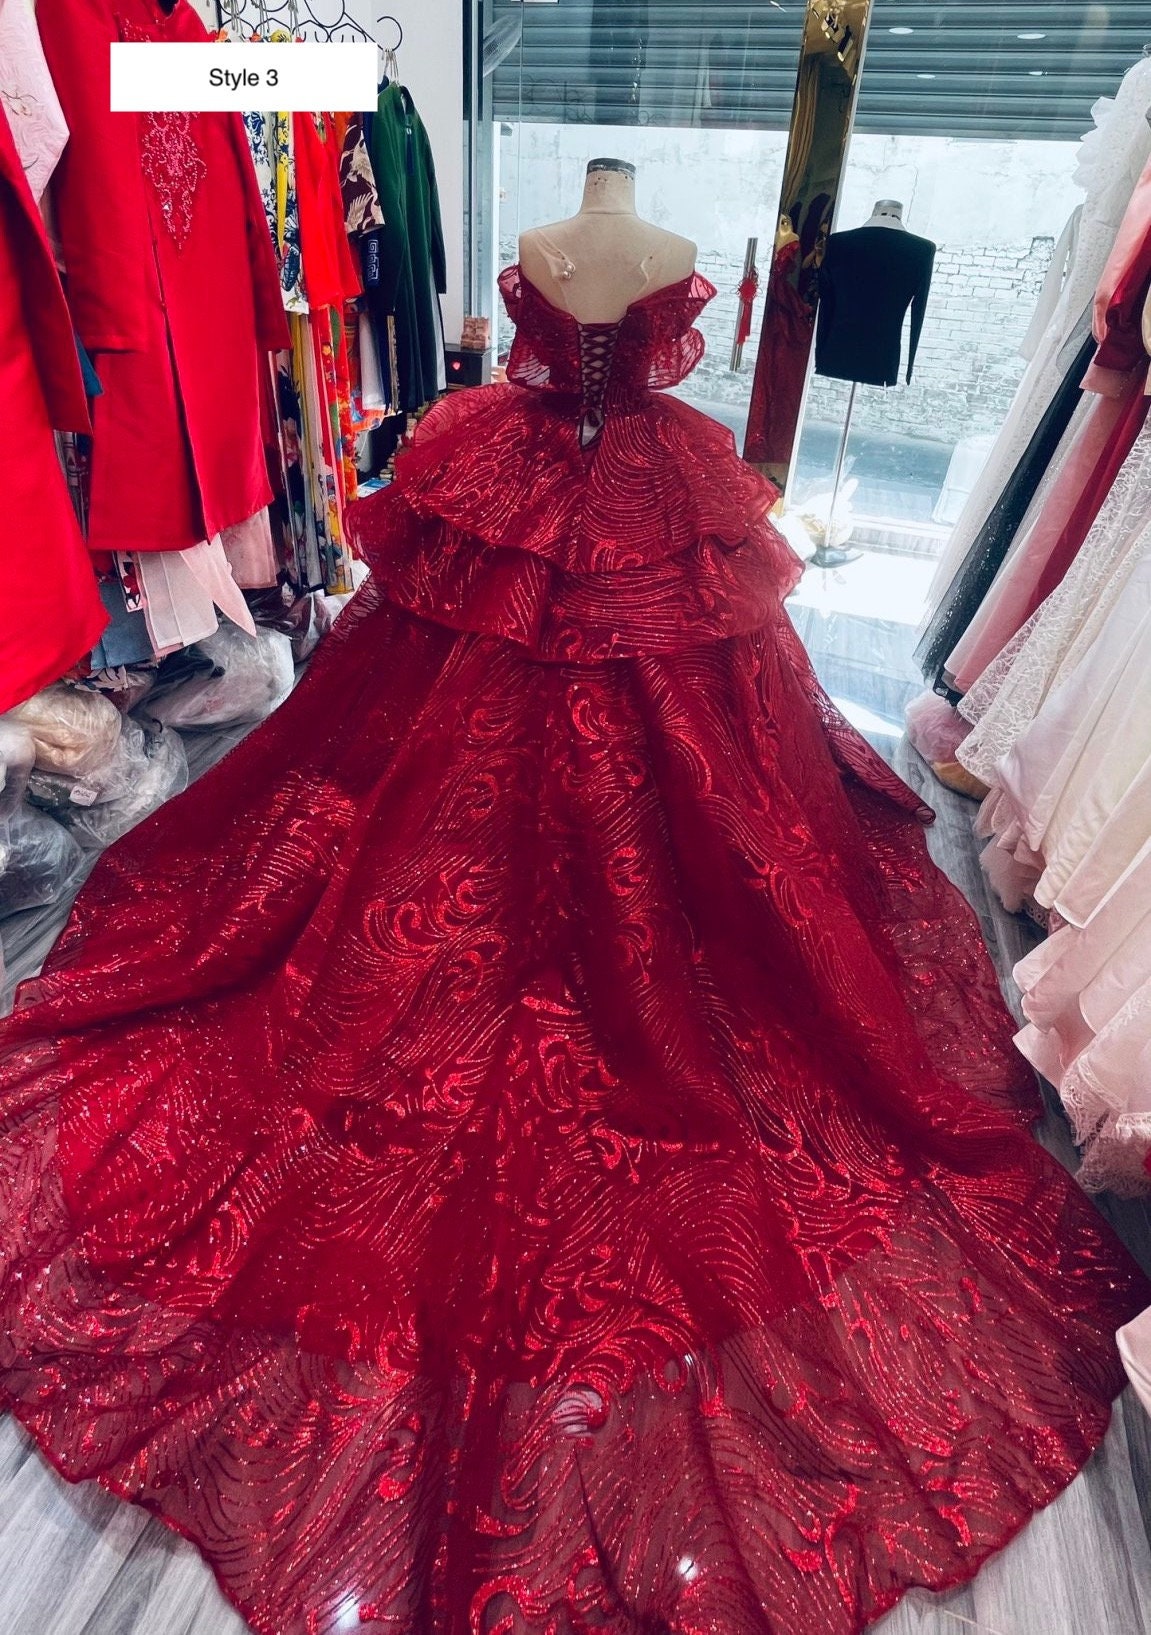 Premium Photo | A red wedding dress with a long train and a long train